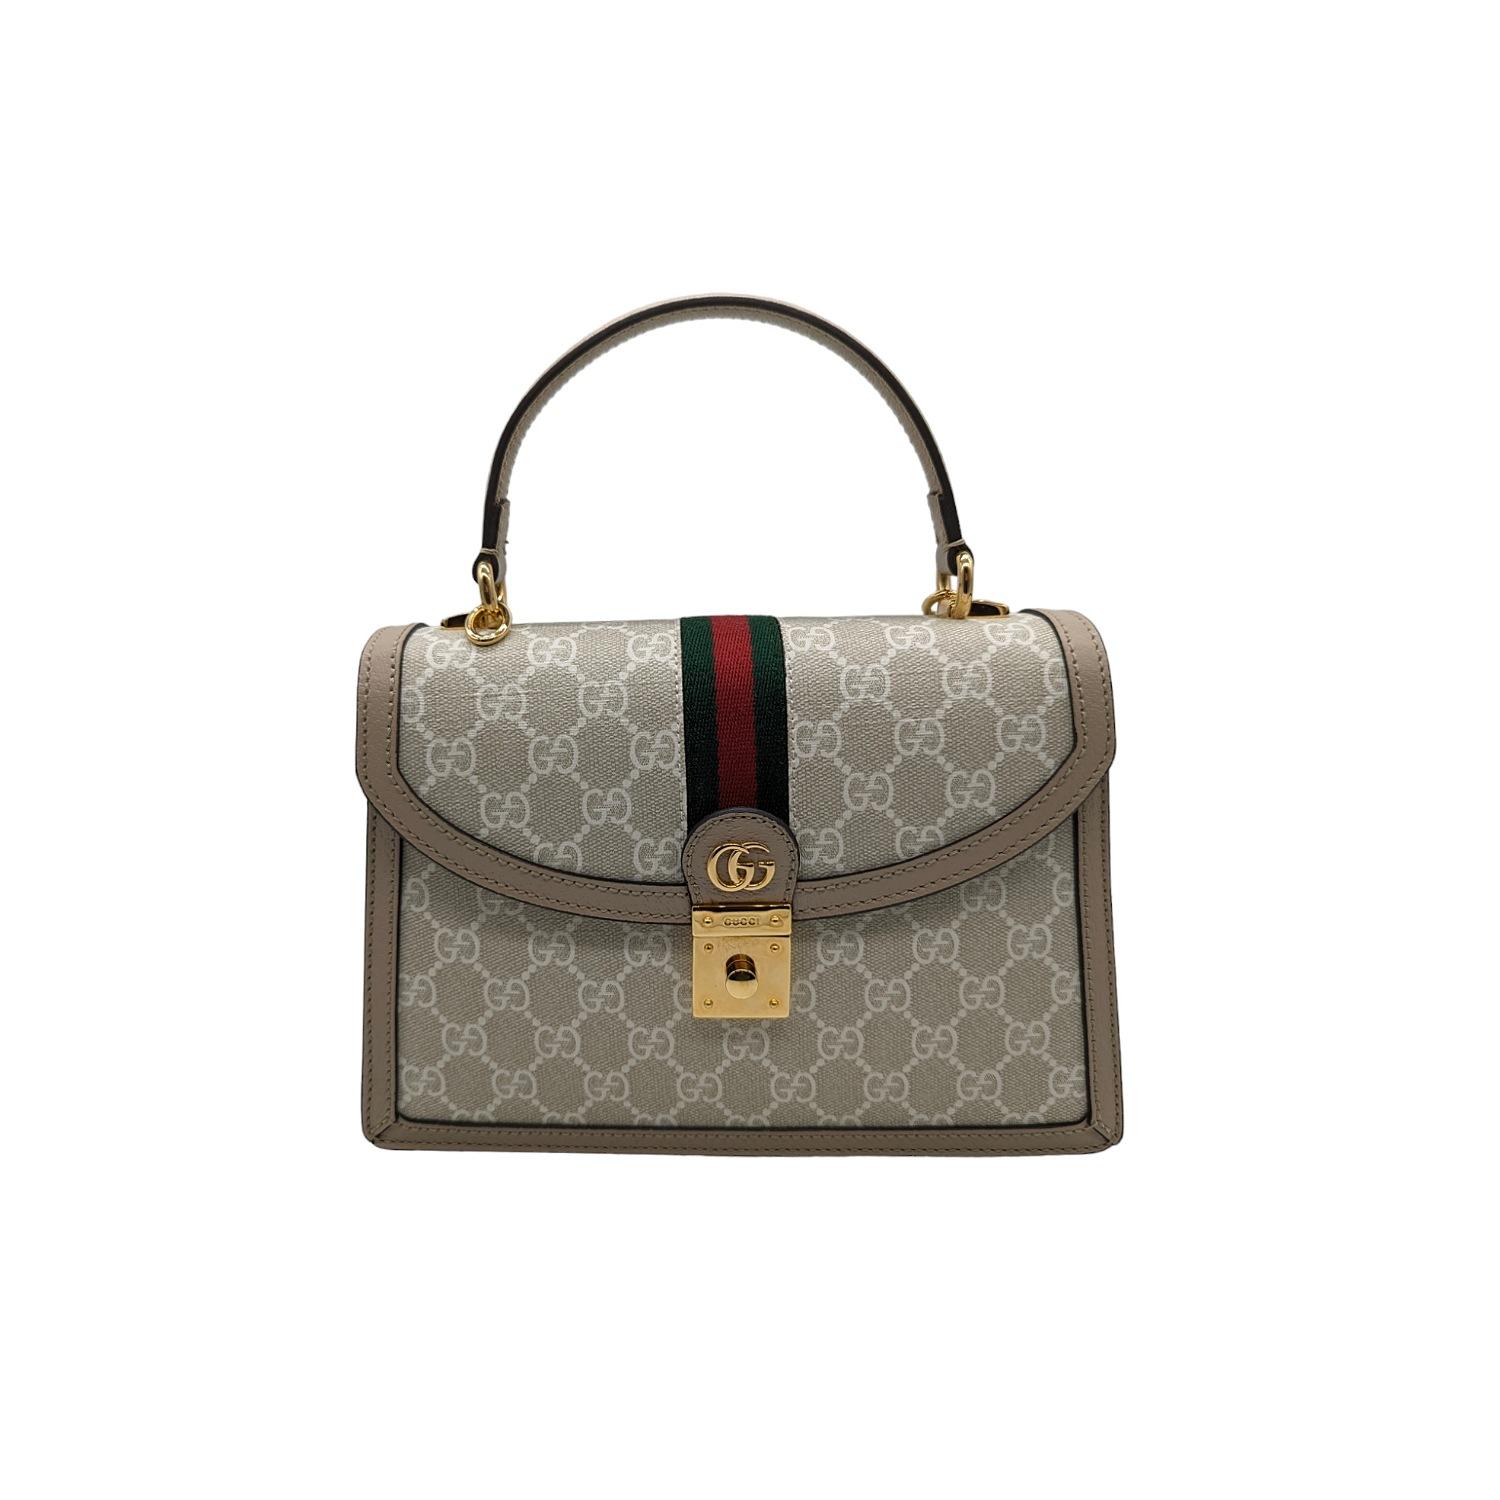 This Gucci top handle satchel is beautifully crafted of white on beige Gucci GG Supreme coated canvas. The bag features an adjustable beige leather shoulder strap with aged gold hardware, a green and red web stripe detail down the center, and a